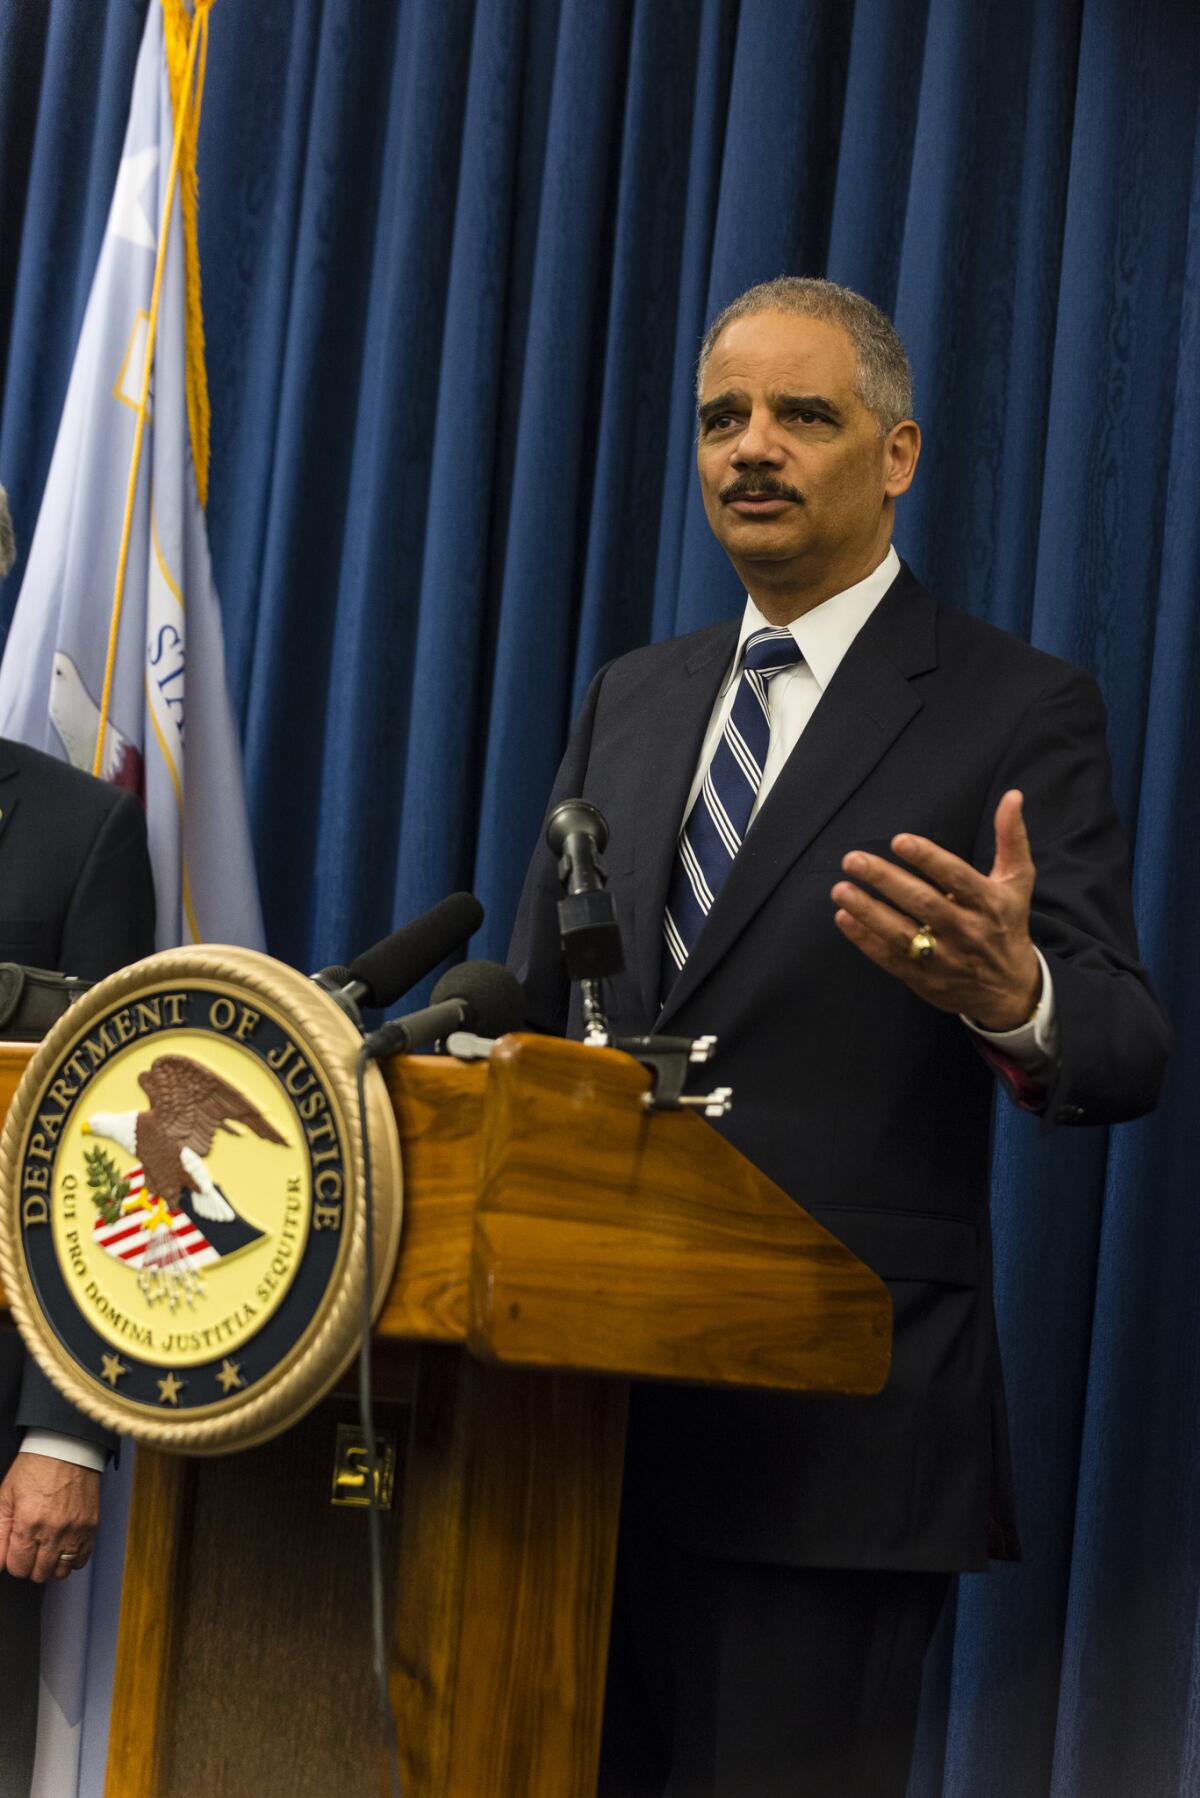 U.S. Attorney General Eric Holder speaks to reporters at a press conference on December 4, 2014 oin Cleveland, Ohio.